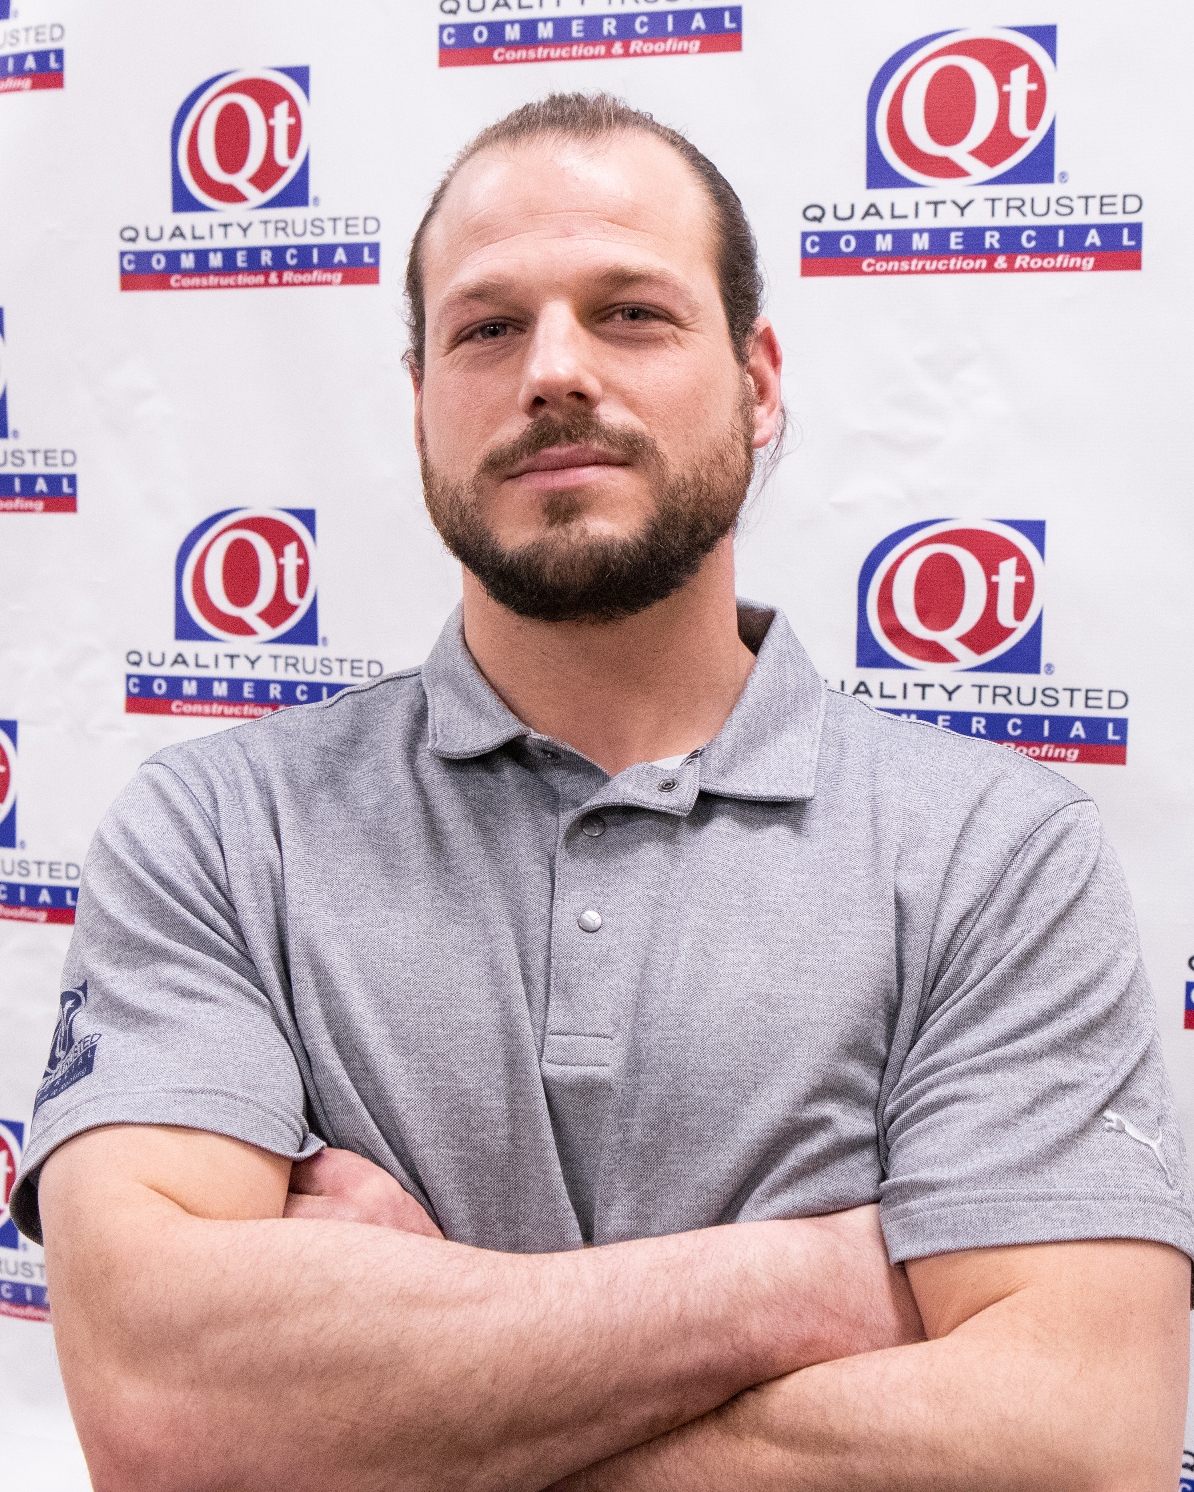 Mike Gunderson, Qt Commercial Warehouse Manager